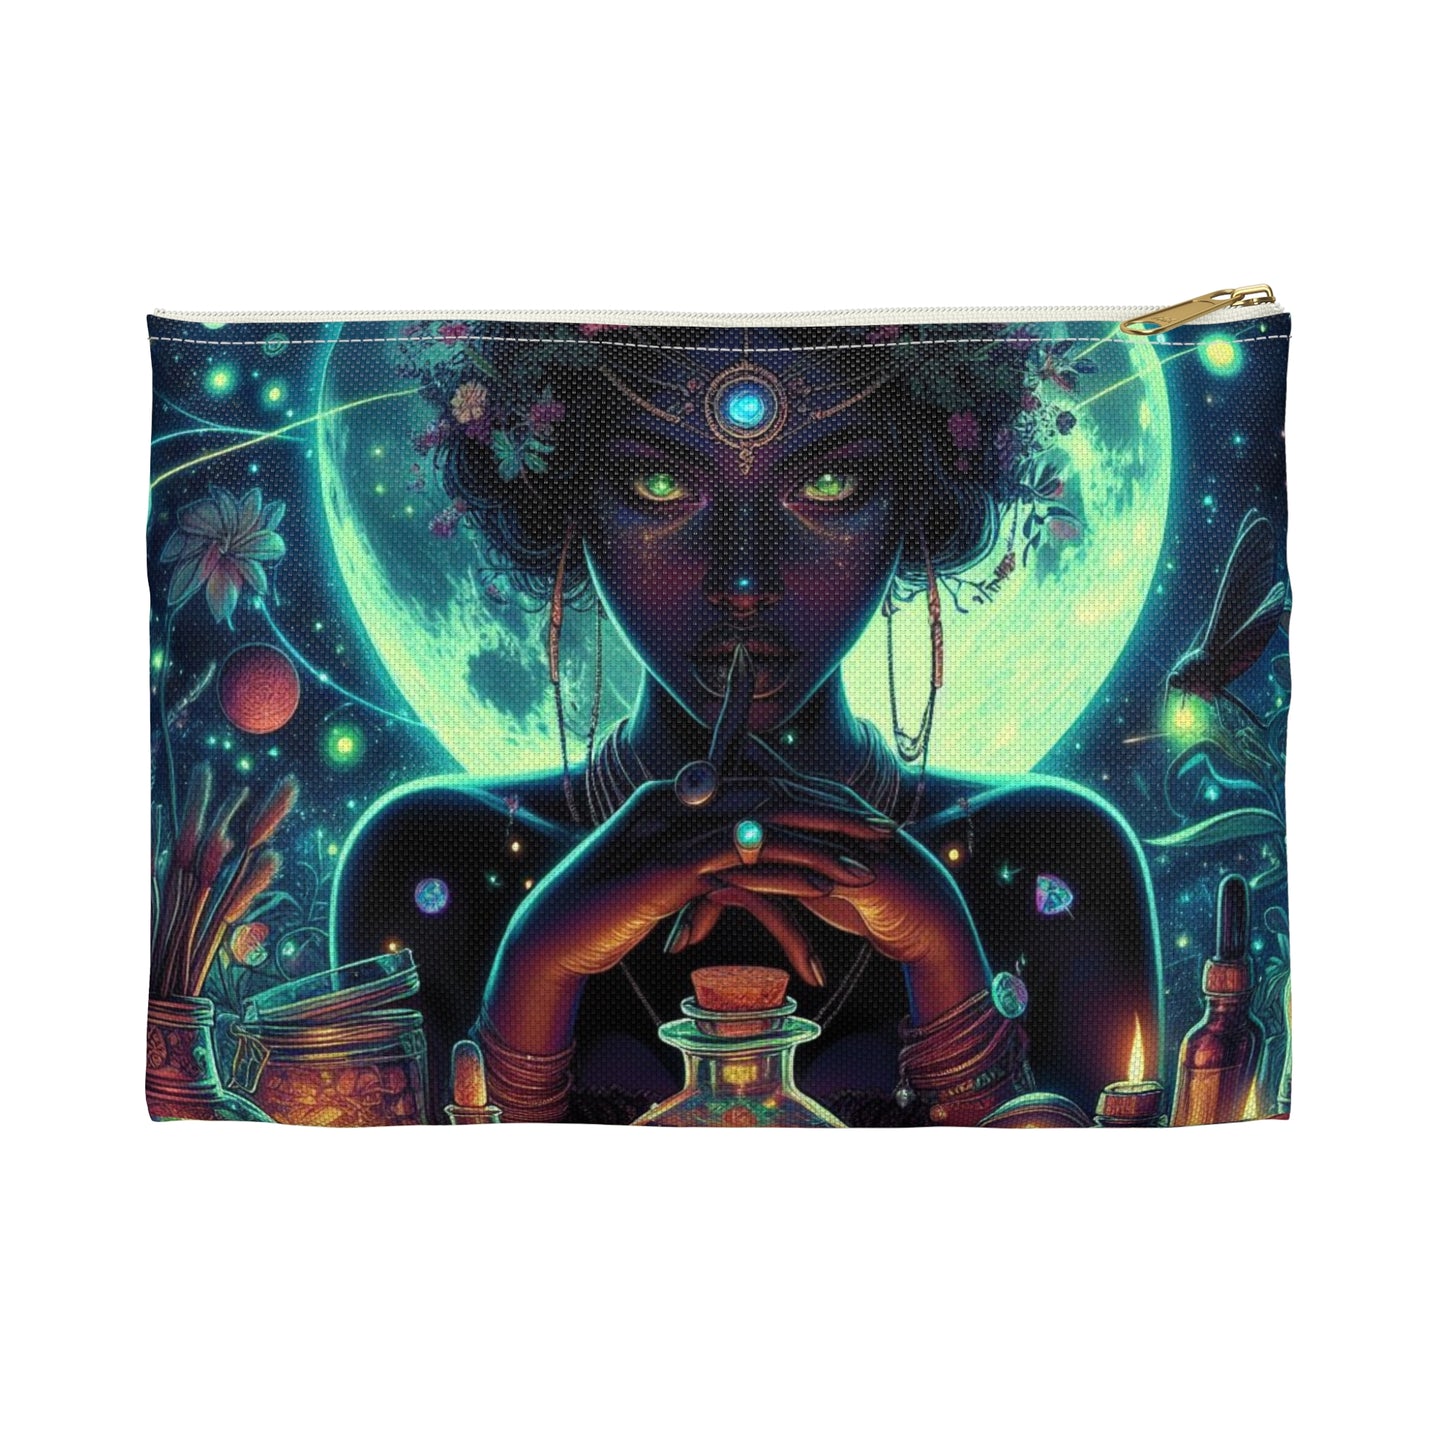 SPELLBOUND Accessory Pouch: Toiletries Bag, On-the-go Items, Tarot Deck, Crystals Bag